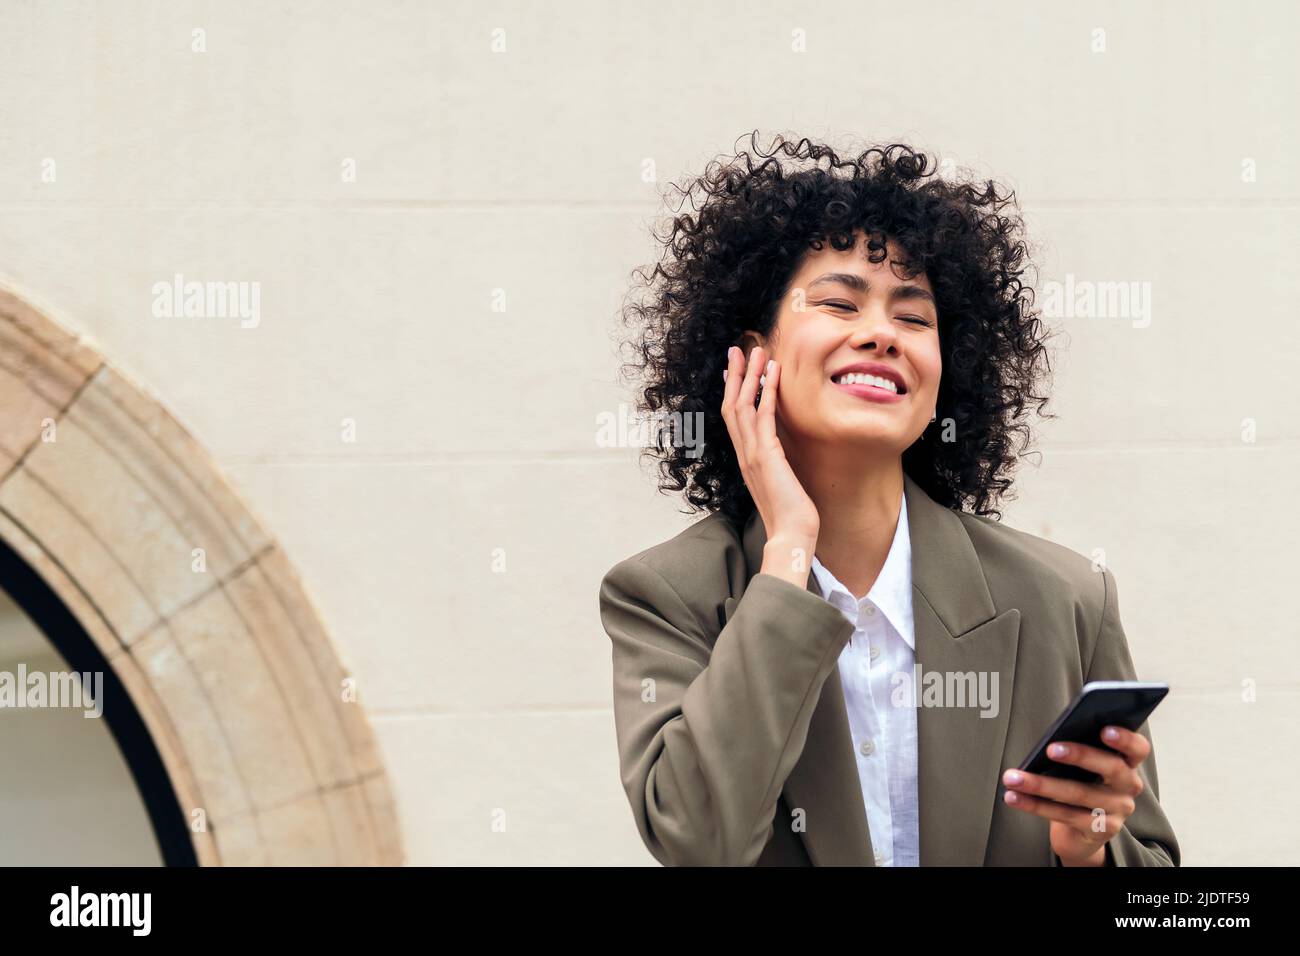 happy woman with wireless earphones enjoys listening to music with her phone, concept of youth and technology, copy space for text Stock Photo